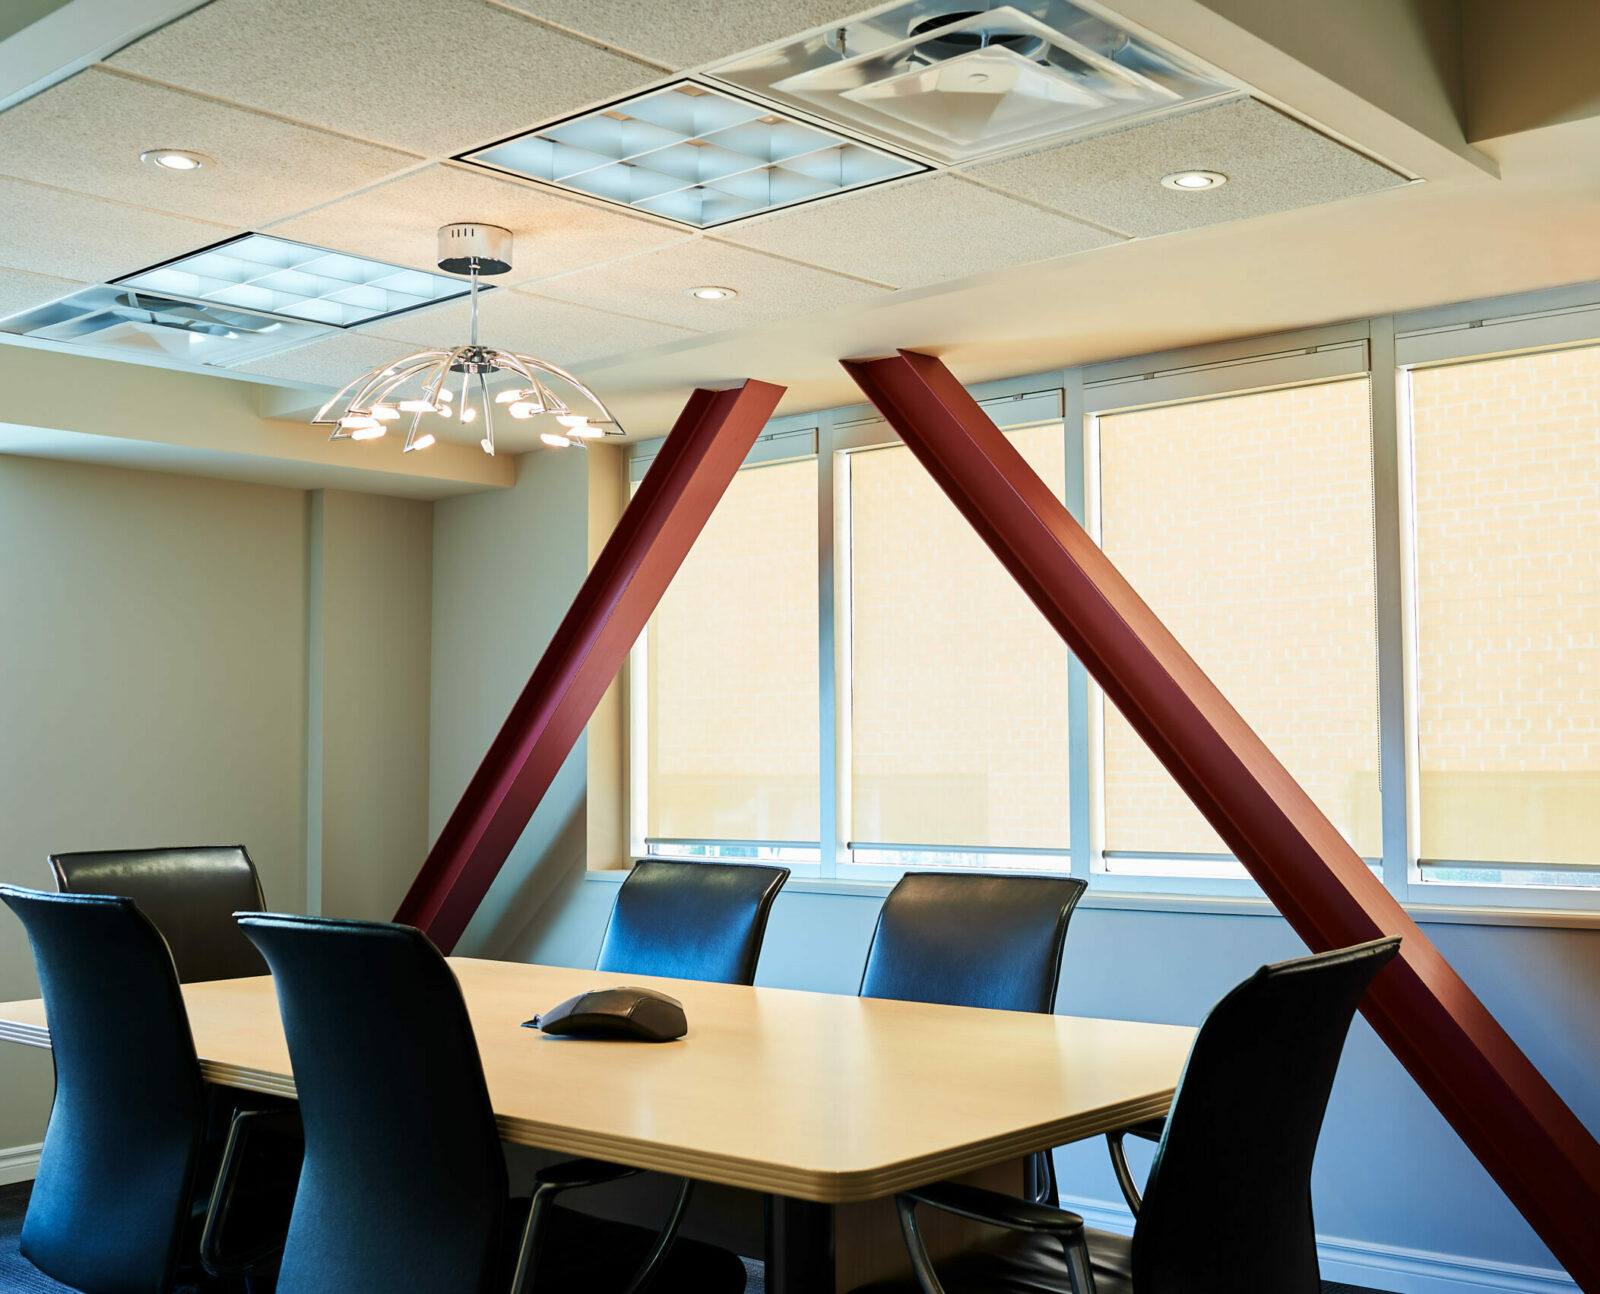 Our law firm in Hamilton, Ontario boasts a contemporary conference room outfitted with a polished wooden table, sleek black chairs, and expansive windows shaded by blinds.